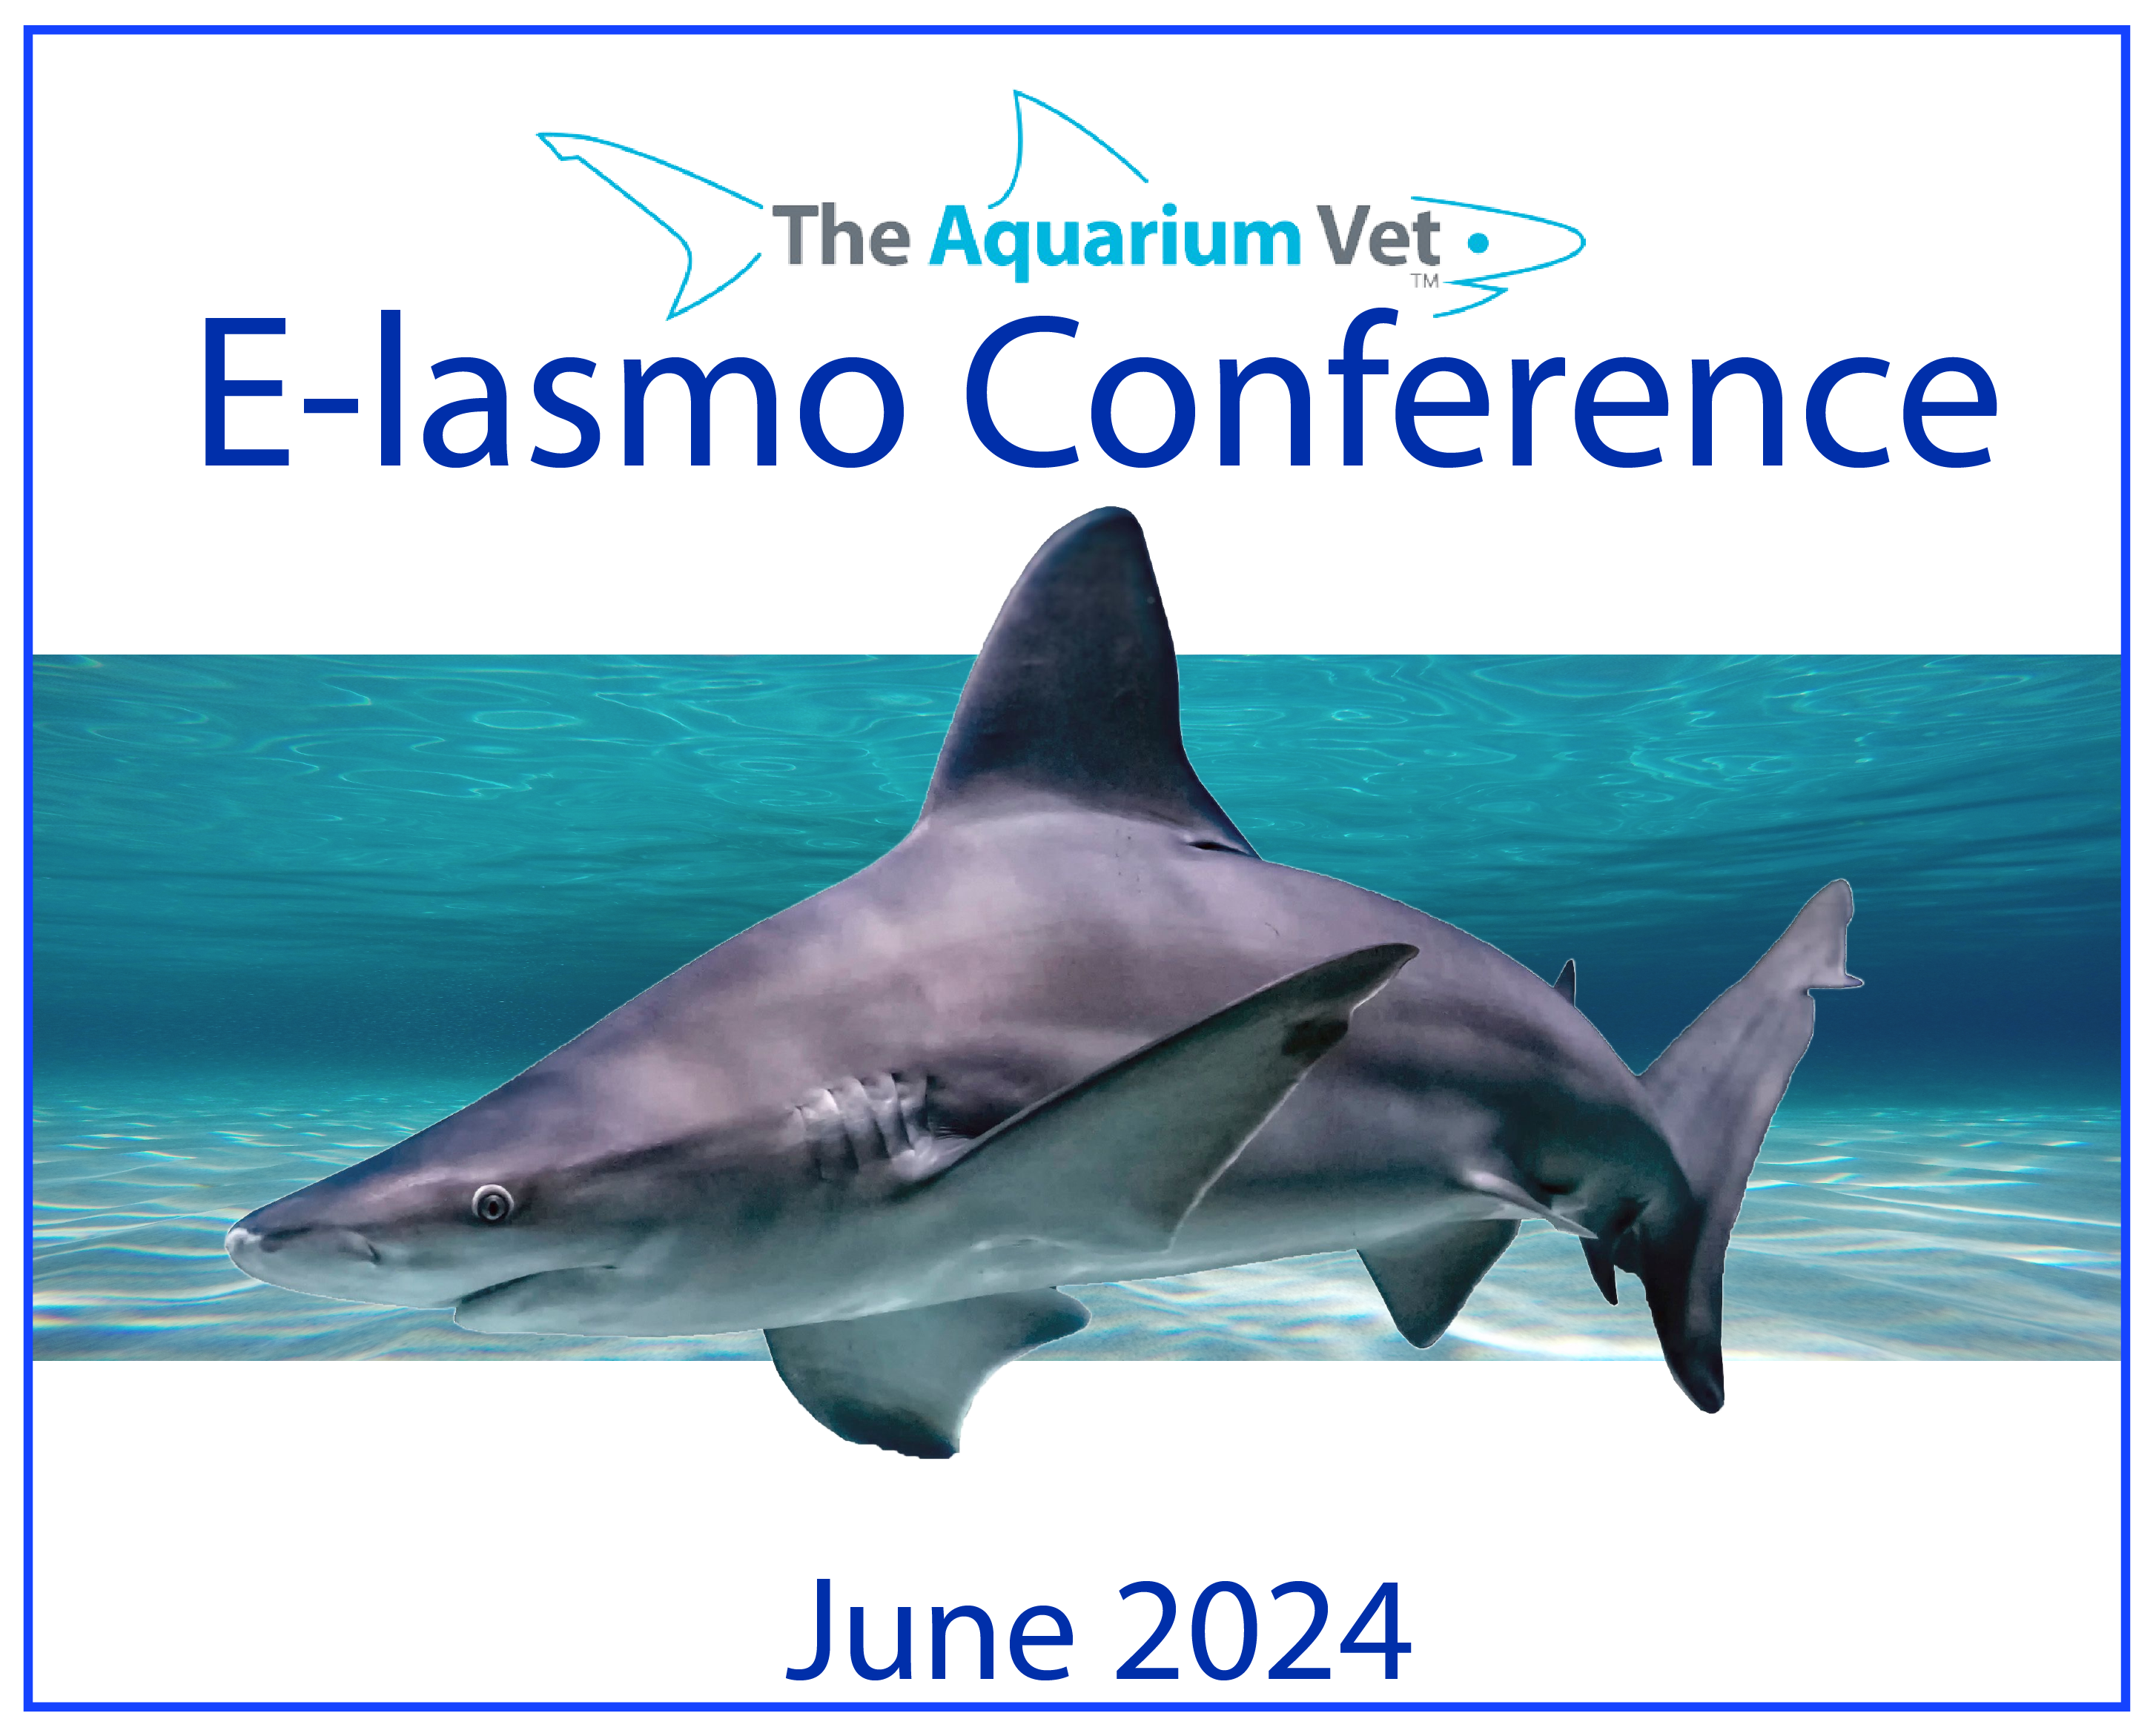 E-lasmo Conference 2024 - Early Bird